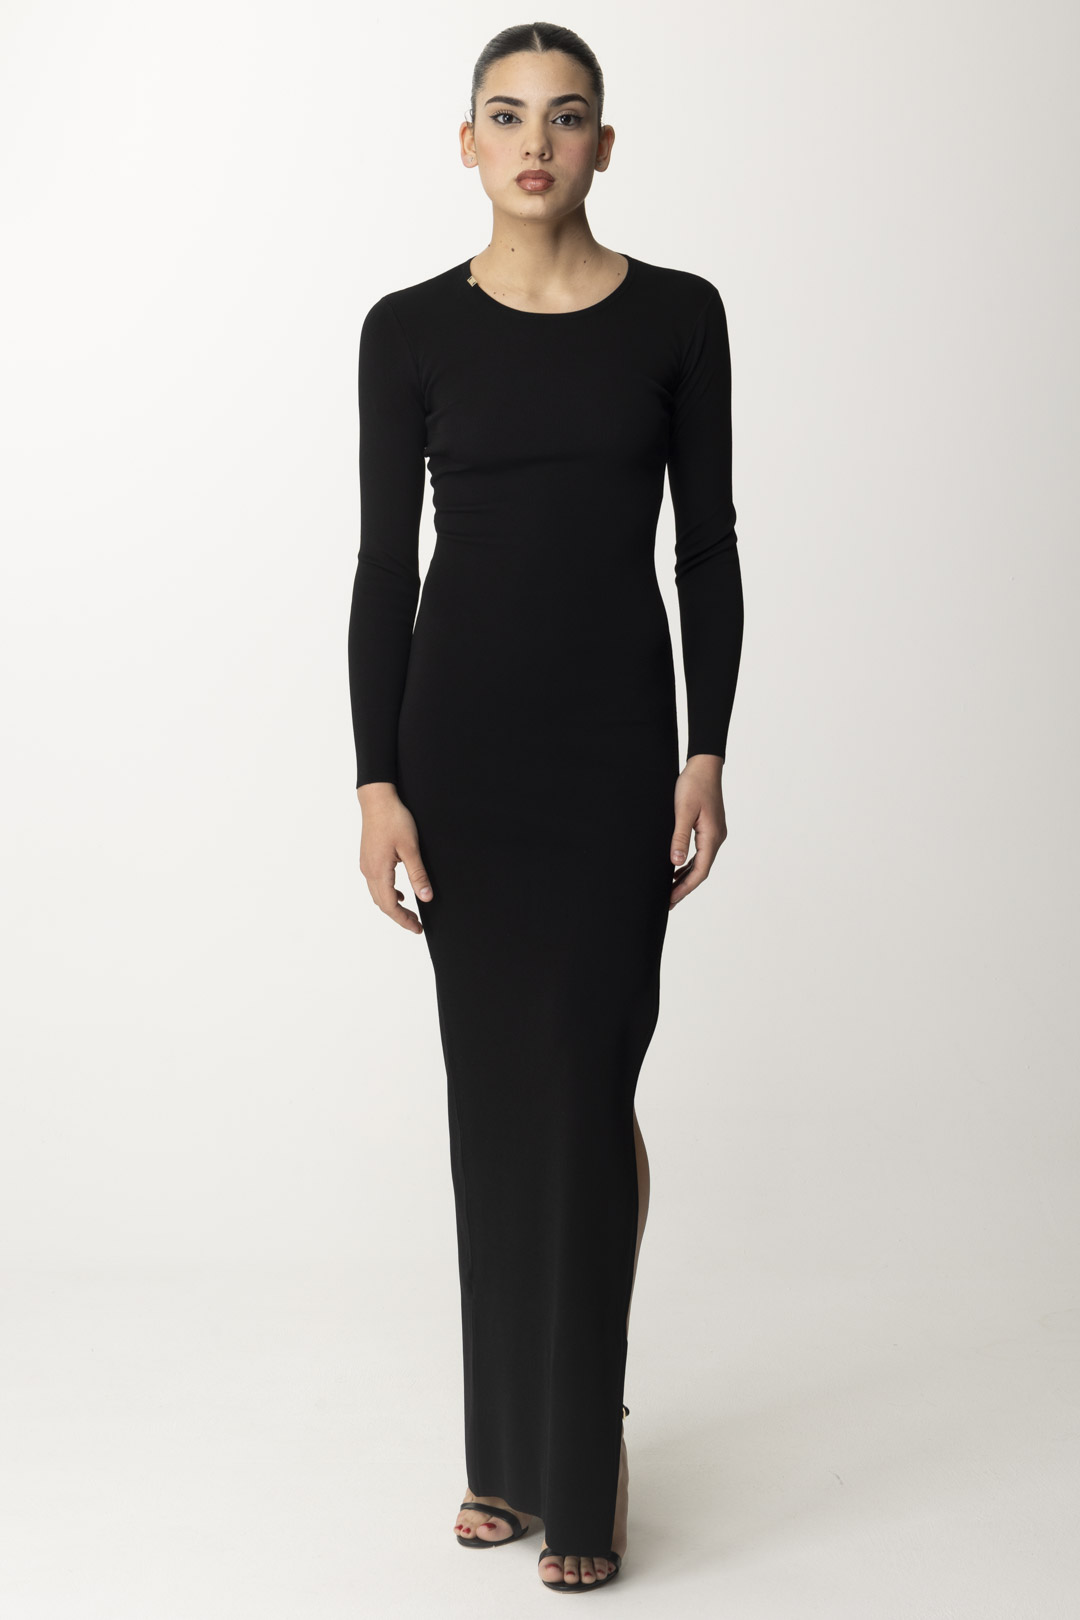 Preview: Elisabetta Franchi Knit Red Carpet dress with criss-cross Nero